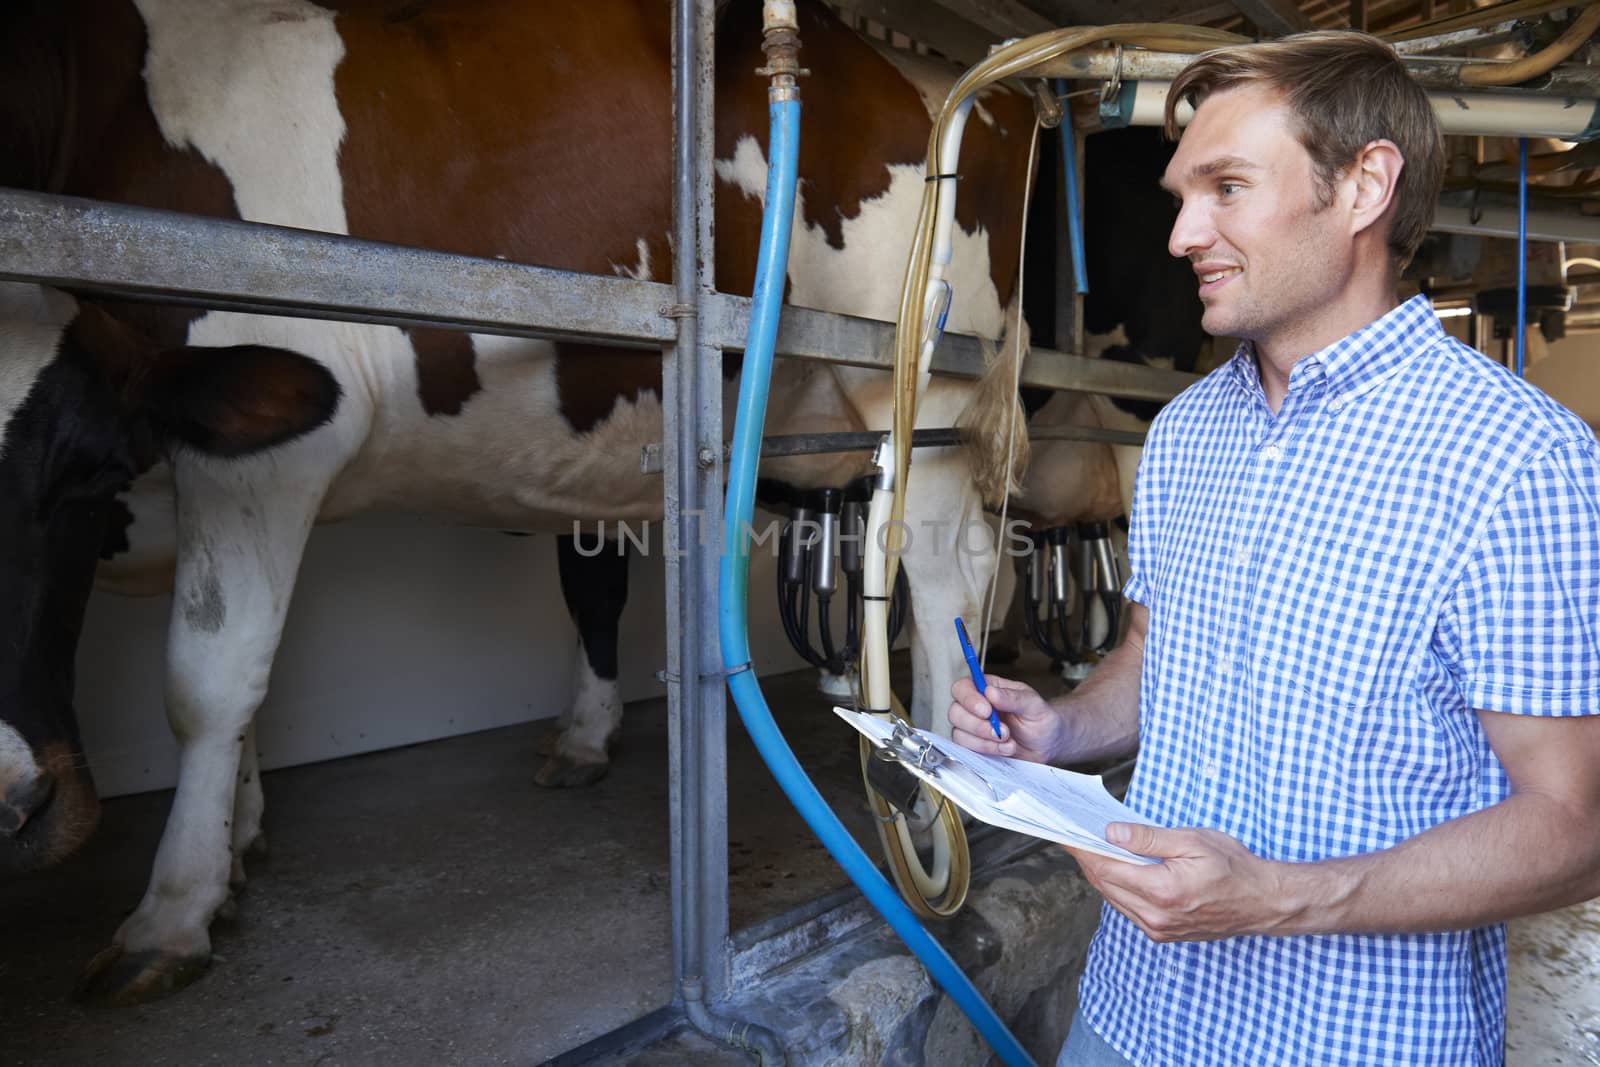 Farmer Inspecting Dairy Cattle In Milking Parlour